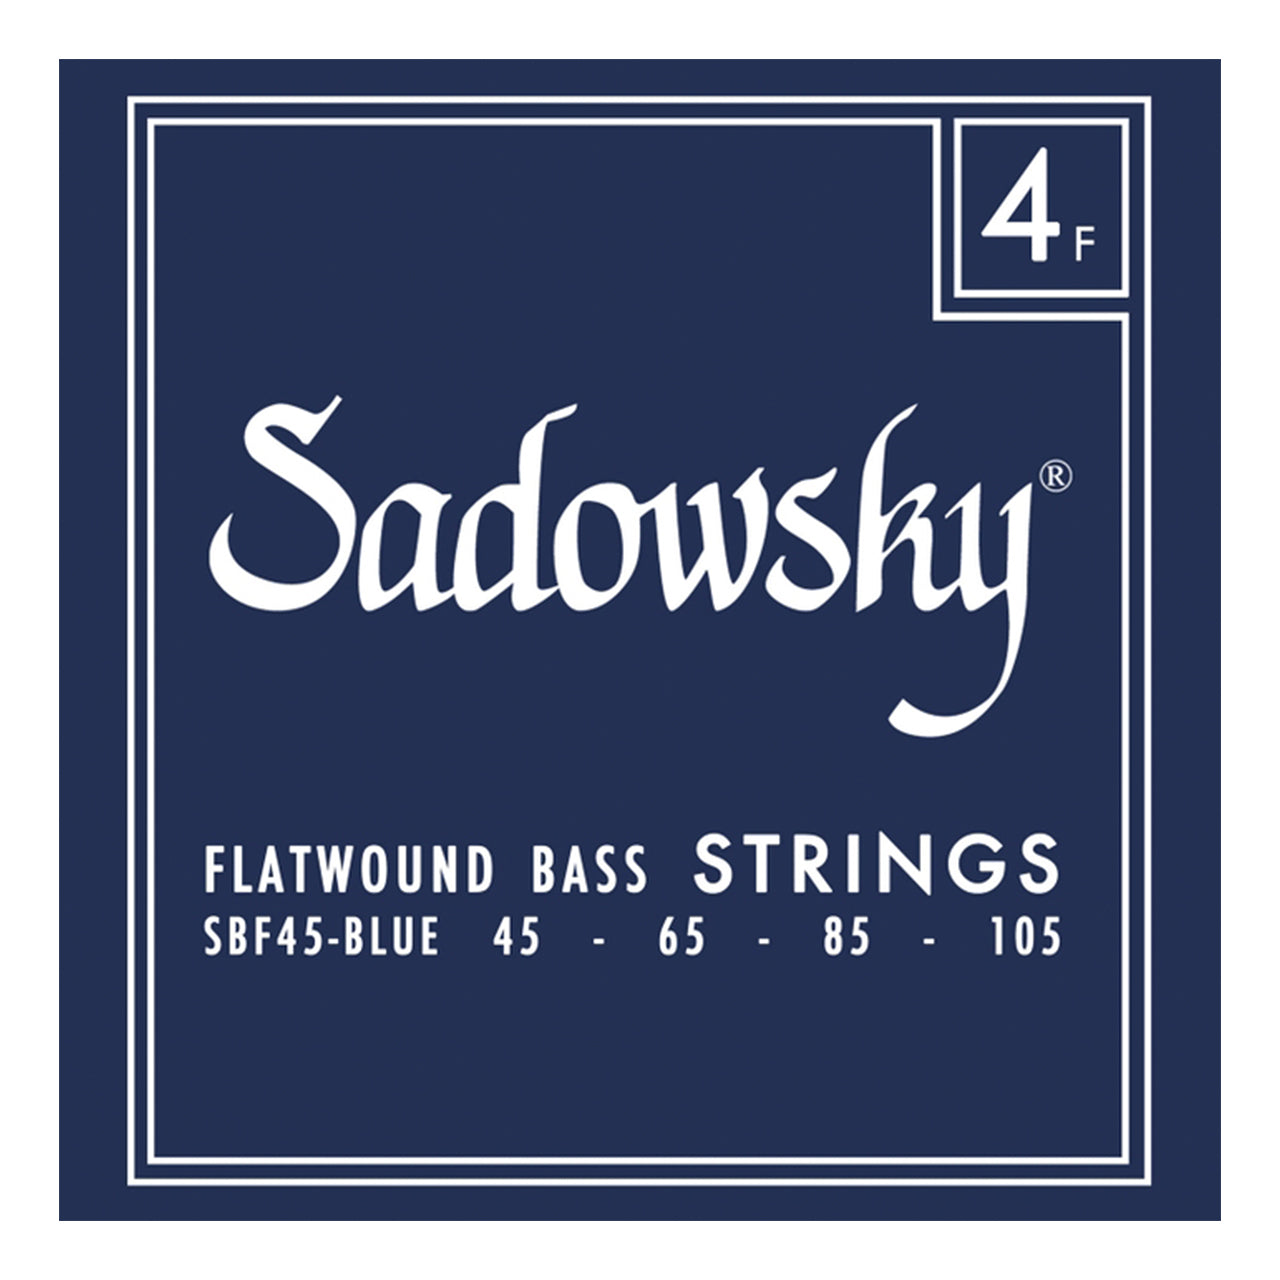 Sadowsky Blue Label Stainless Steel Flatwound Electric Bass Strings, 45-105